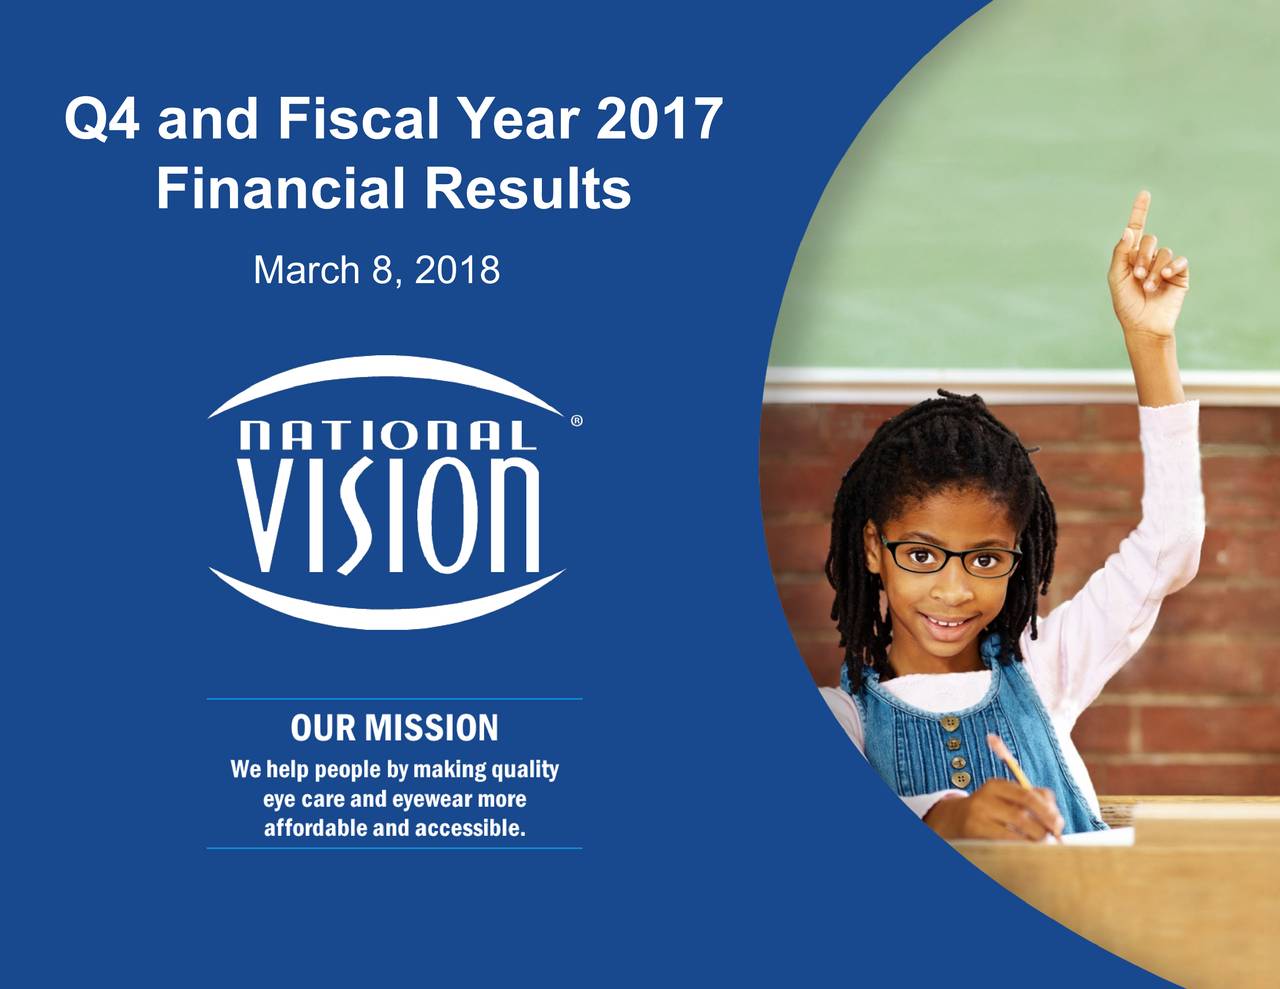 Q4 and Fiscal Year 2017